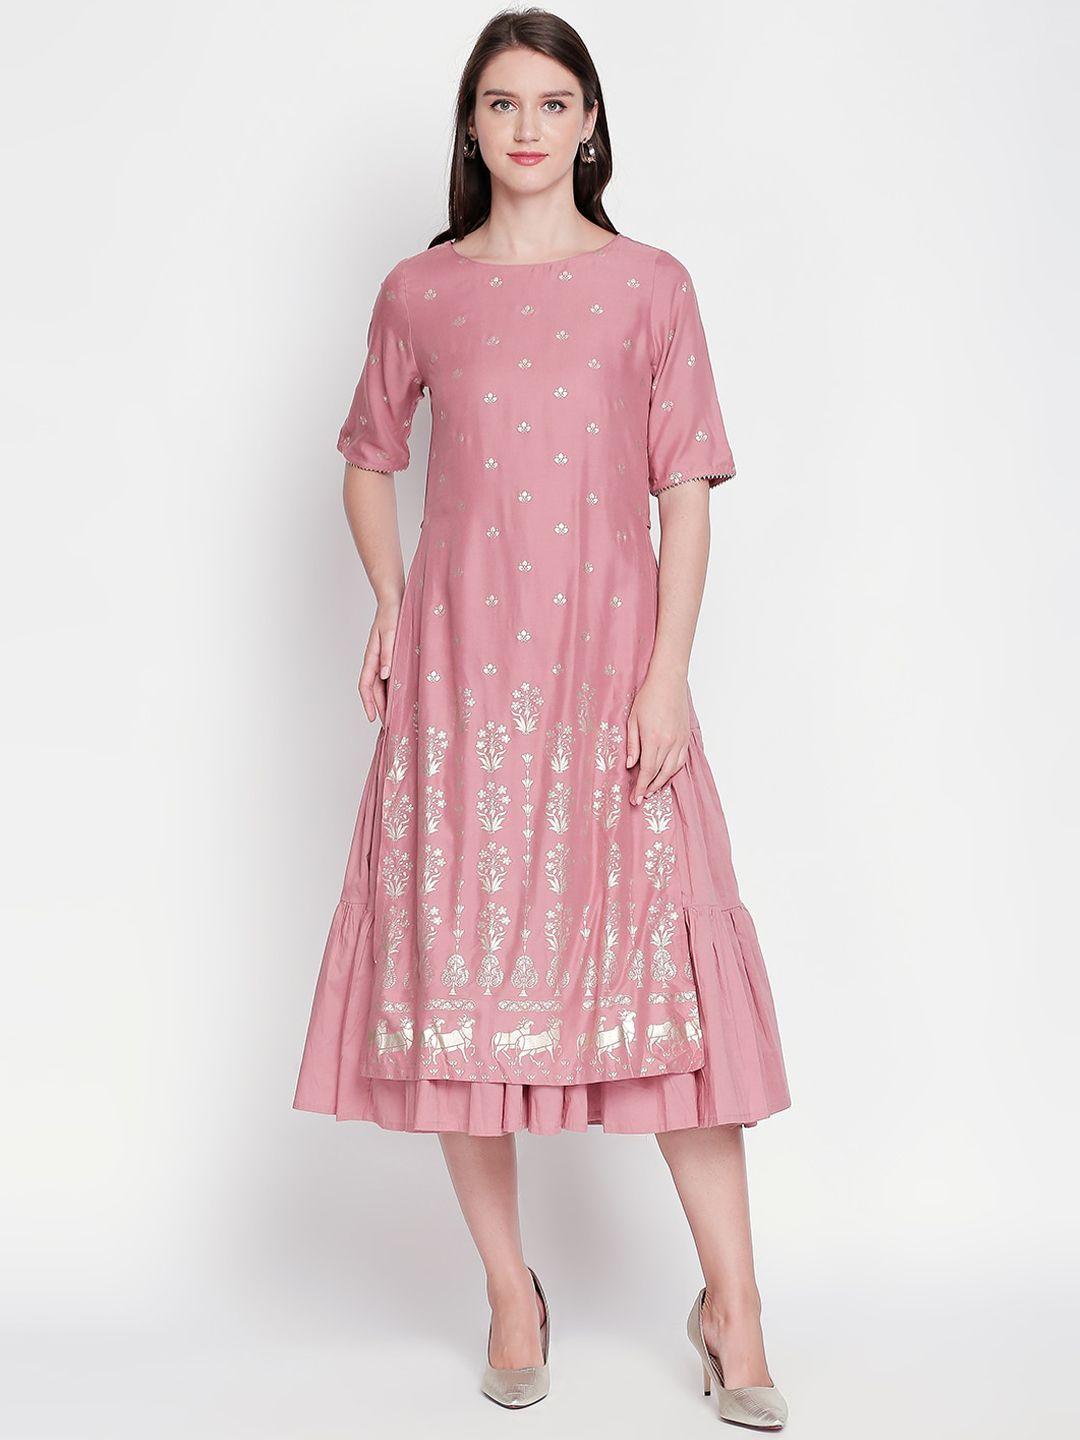 rangmanch by pantaloons women pink printed fit and flare dress